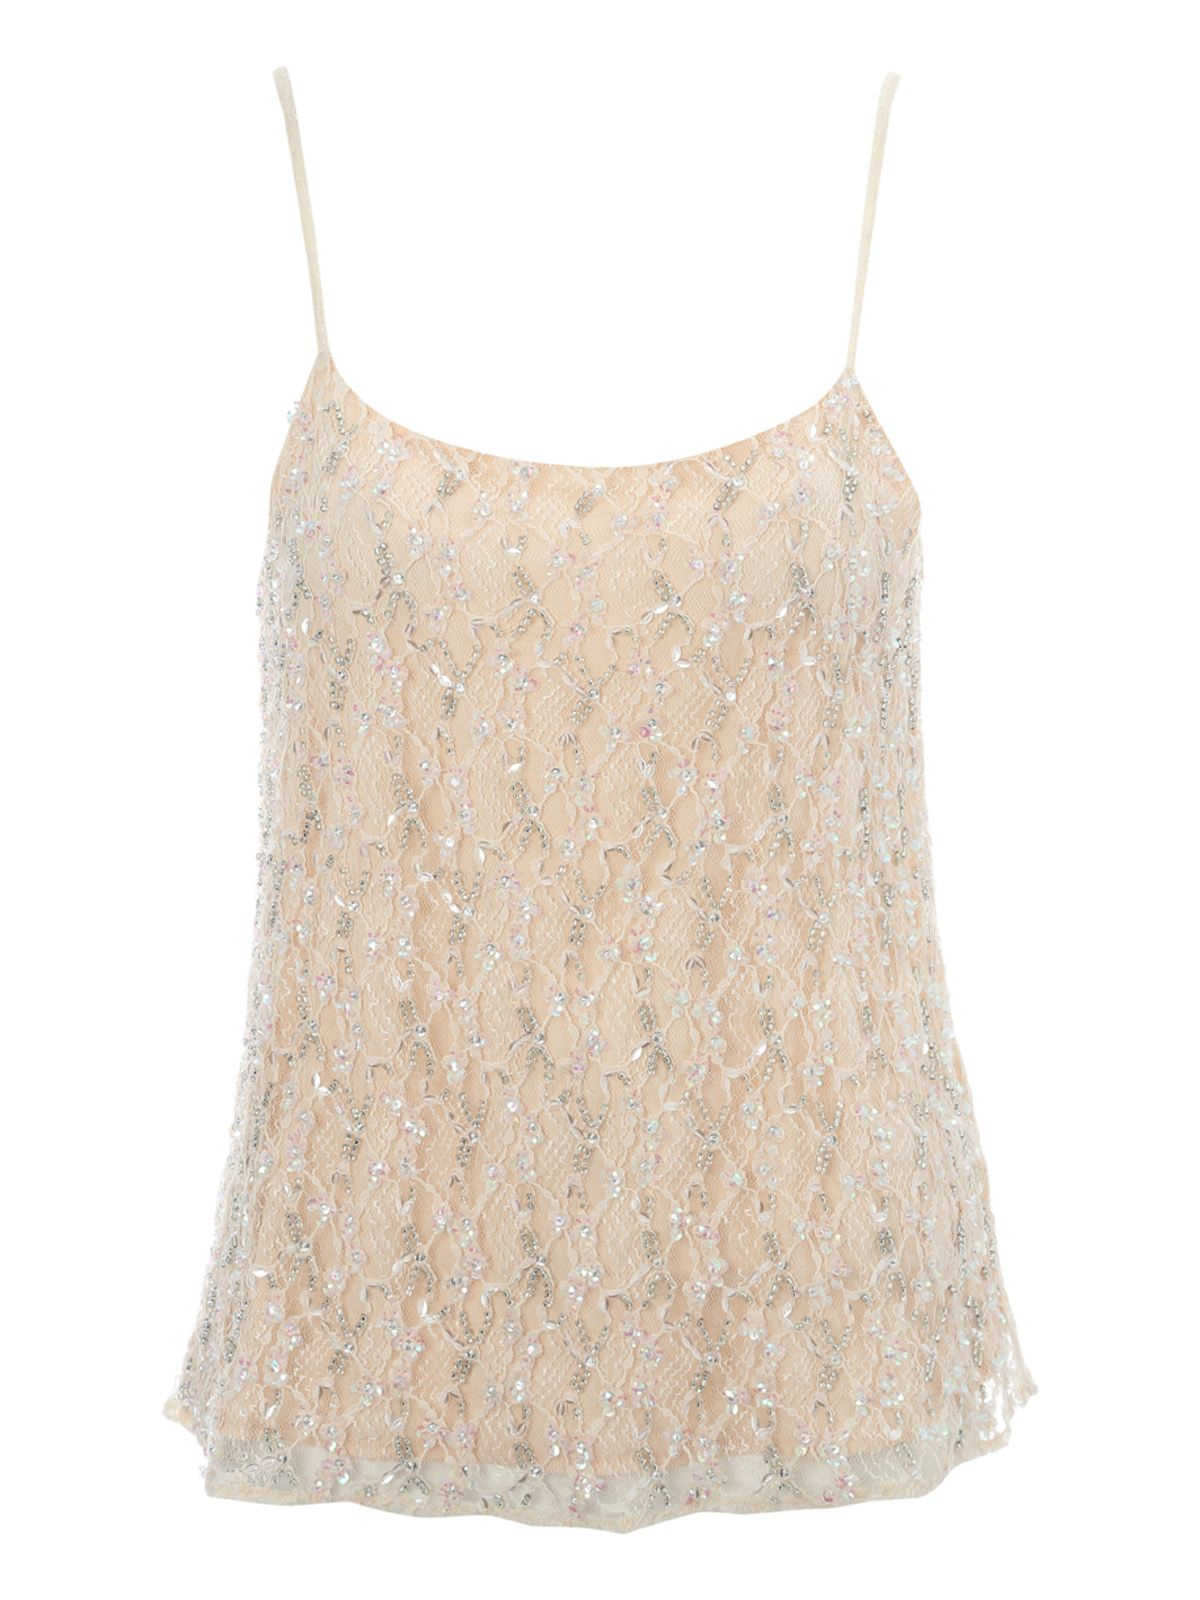 Jane norman Beaded Lace Camisole Top in Pink | Lyst